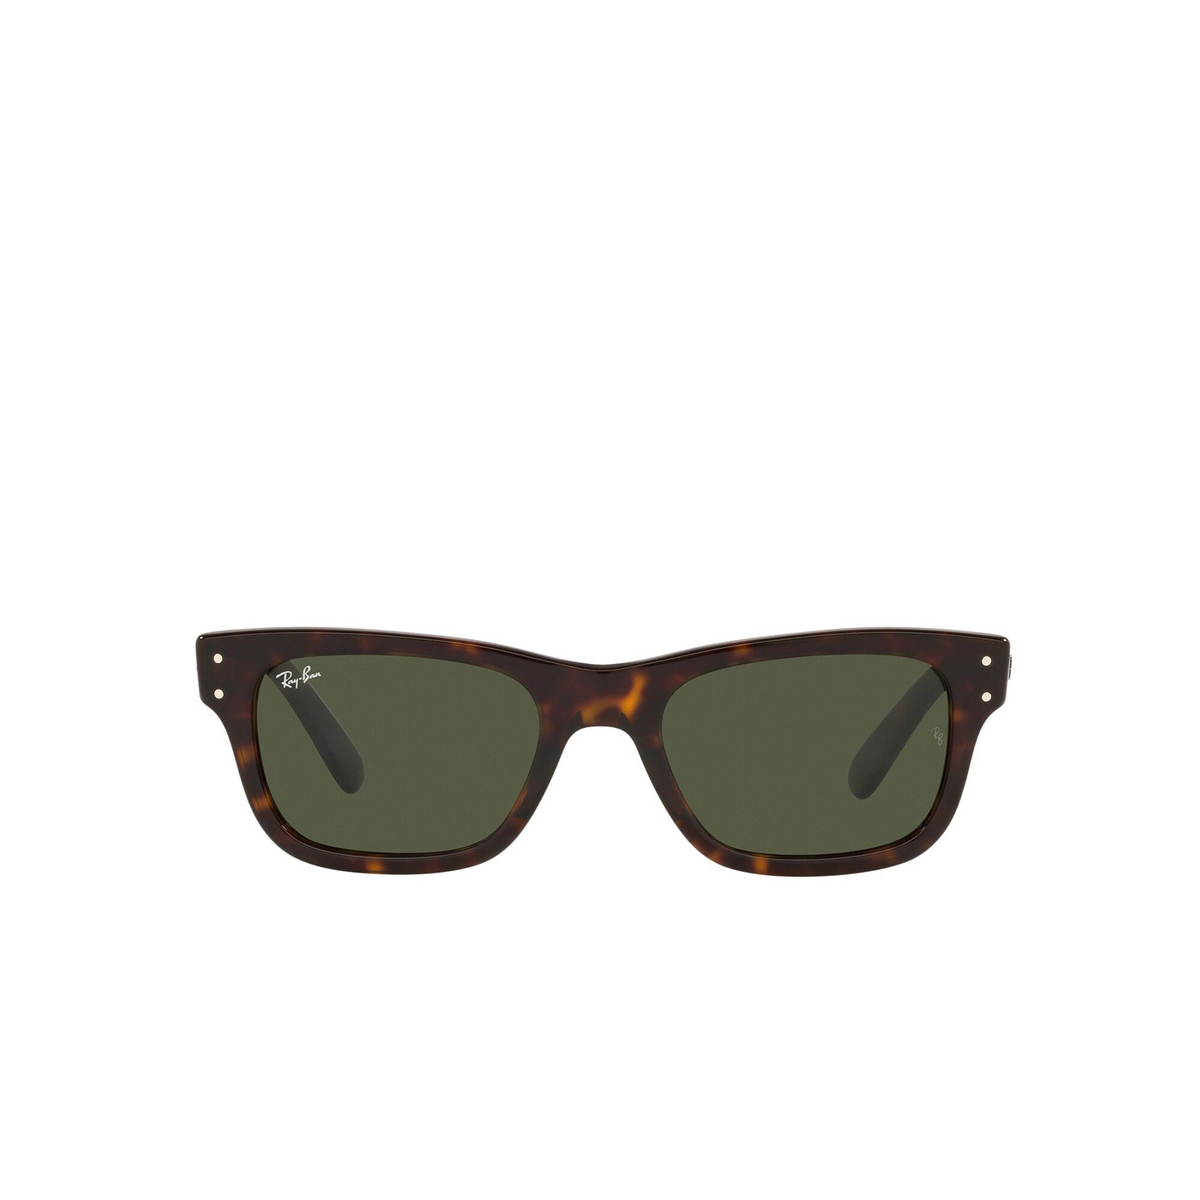 Ray-Ban® Rectangle Sunglasses: Mr Burbank RB2283 color Havana 902/31 - front view.